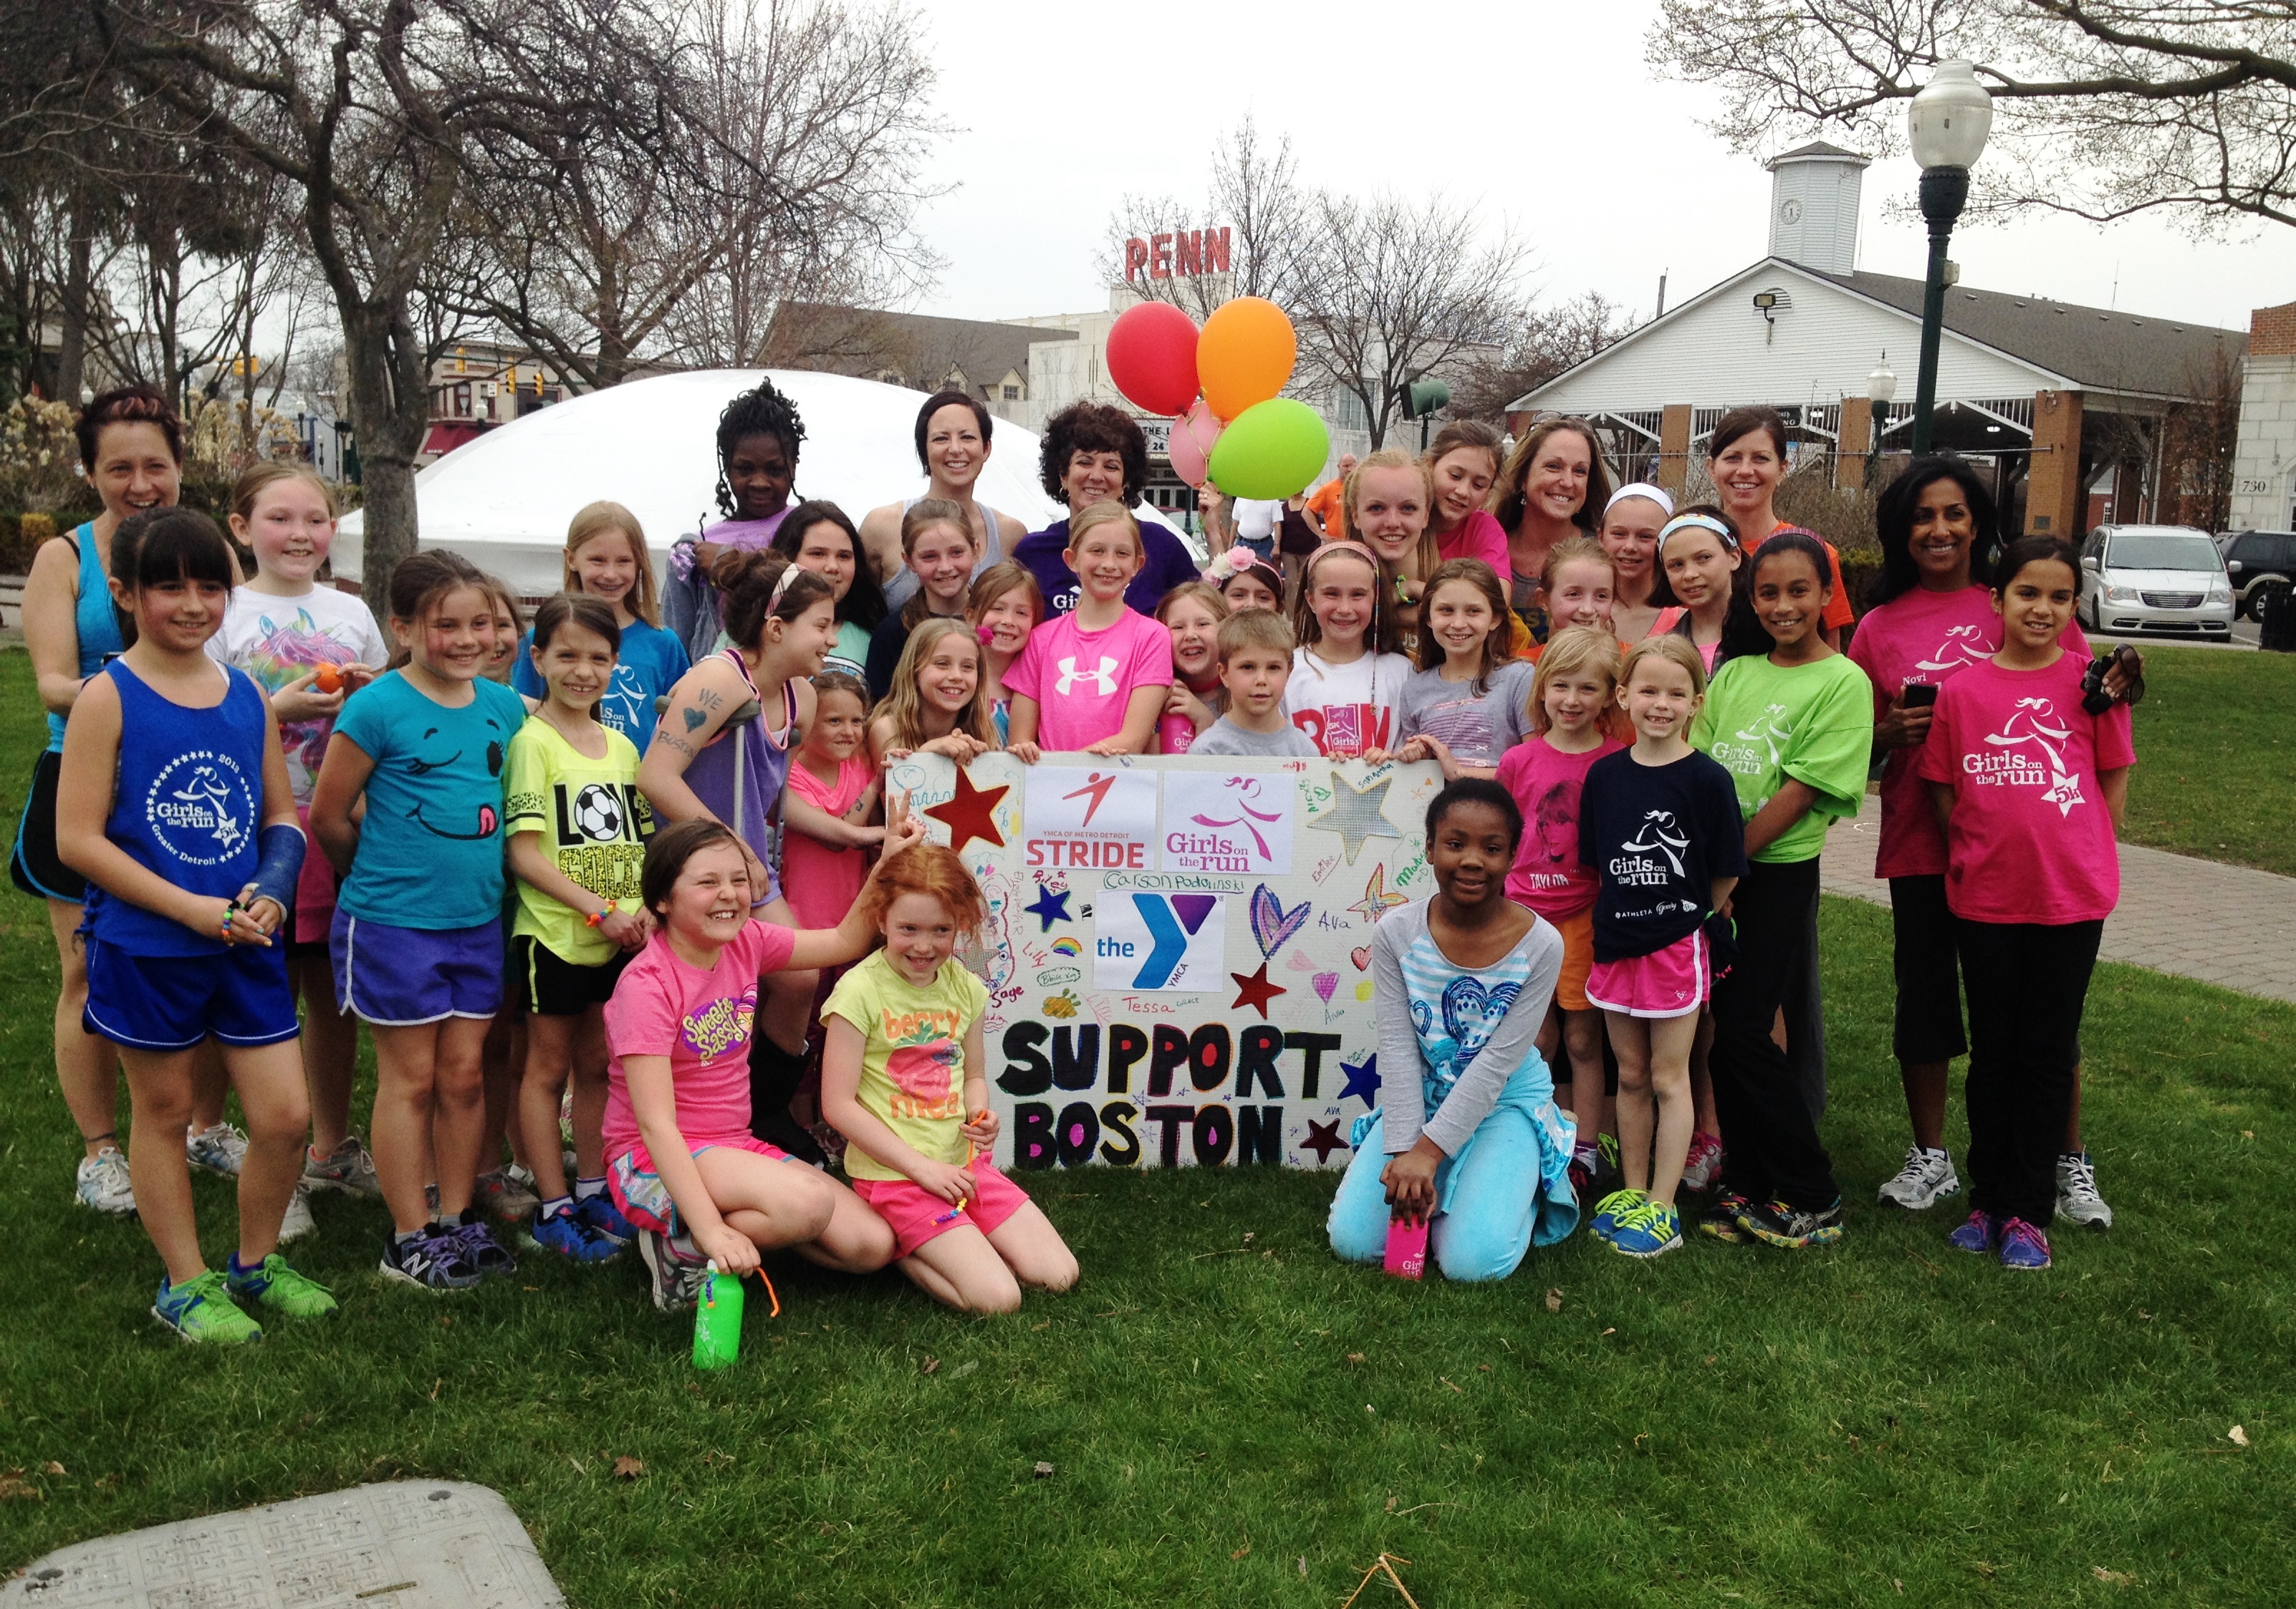 Plymouth GOTR Stands With Boston